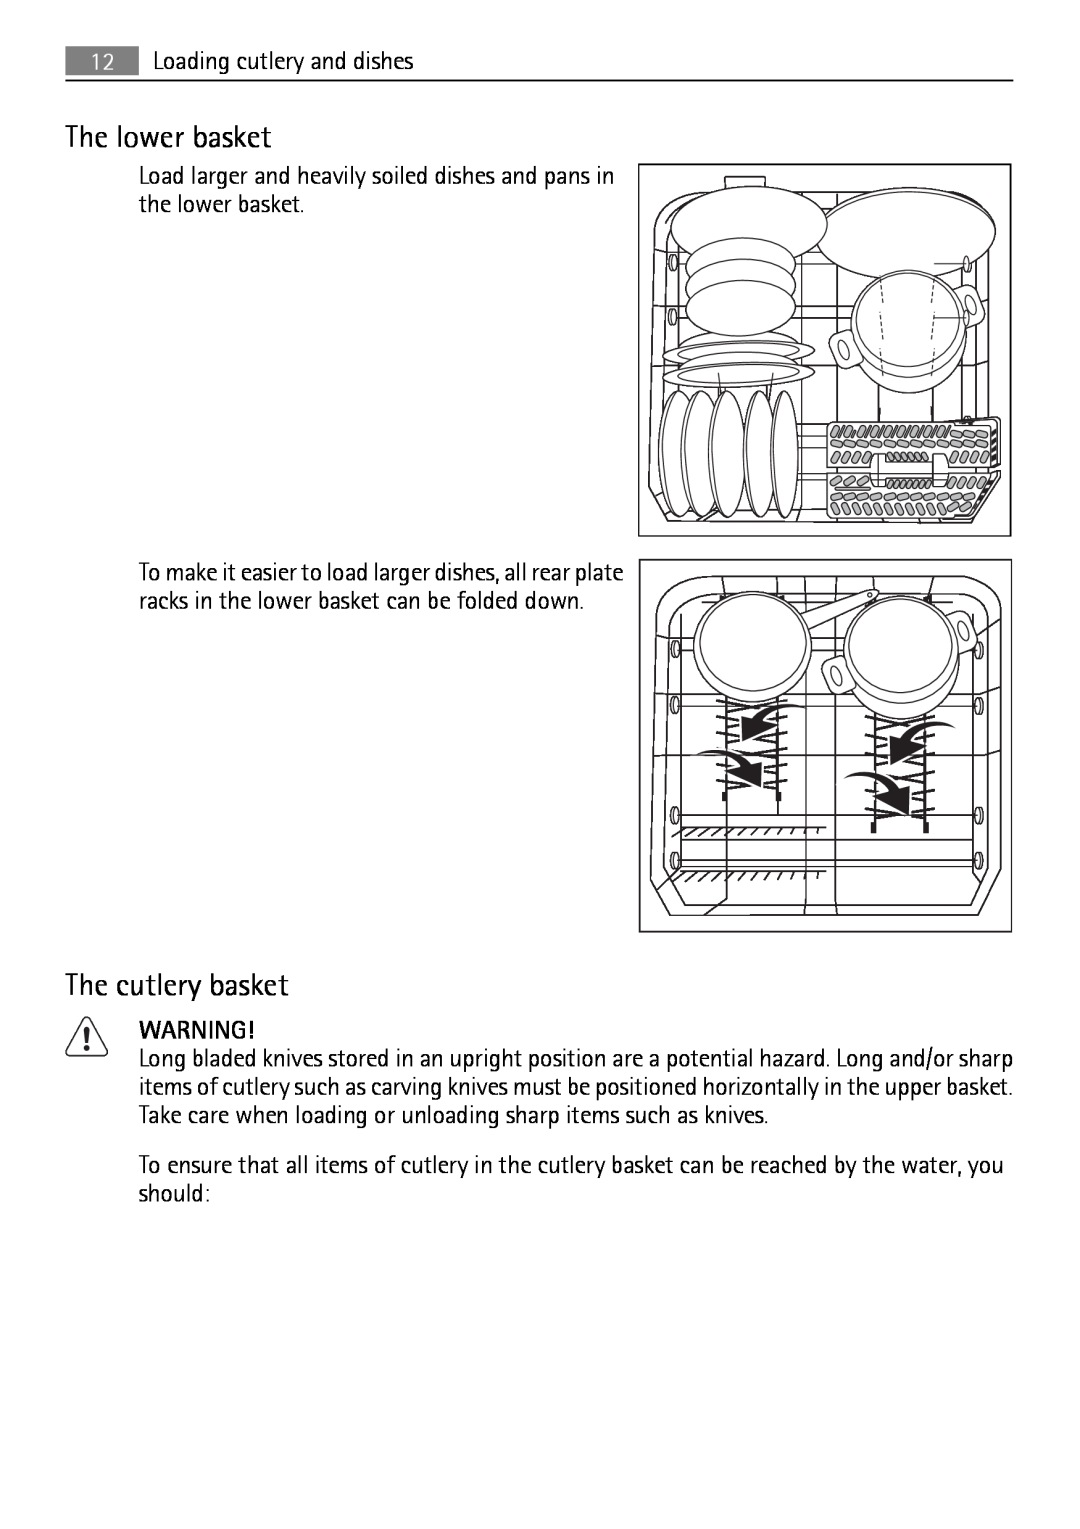 Electrolux QB 5201 user manual The lower basket, The cutlery basket, Loading cutlery and dishes 